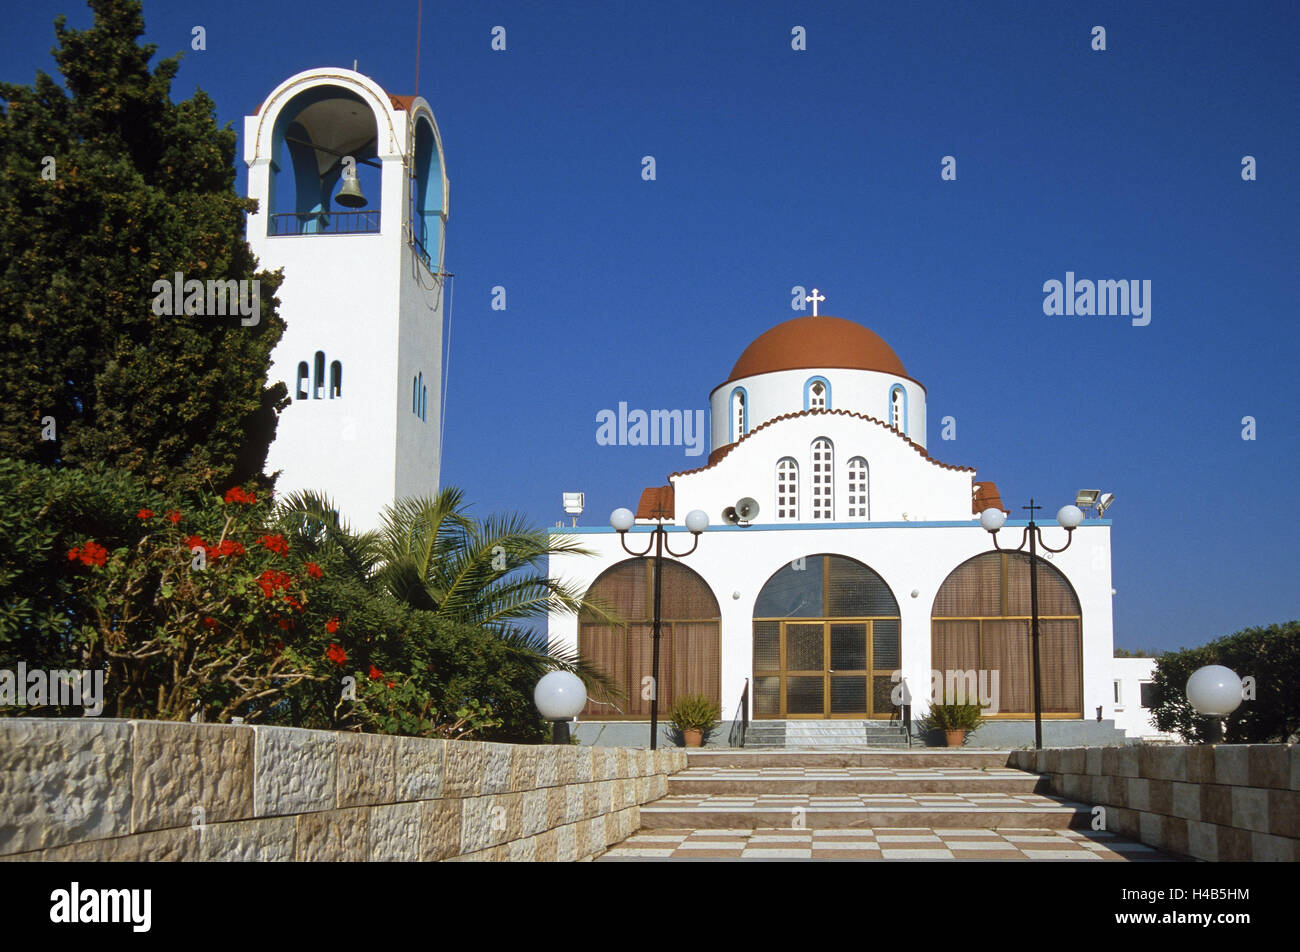 Greece, Dodekanes, island Fondling, Antimachia, church, agio Nikitas, island group, Mediterranean island, the Aegean Sea, Antimacheia, structure, church, sacred construction, steeple, bell tower, band, place of interest, access, Stock Photo